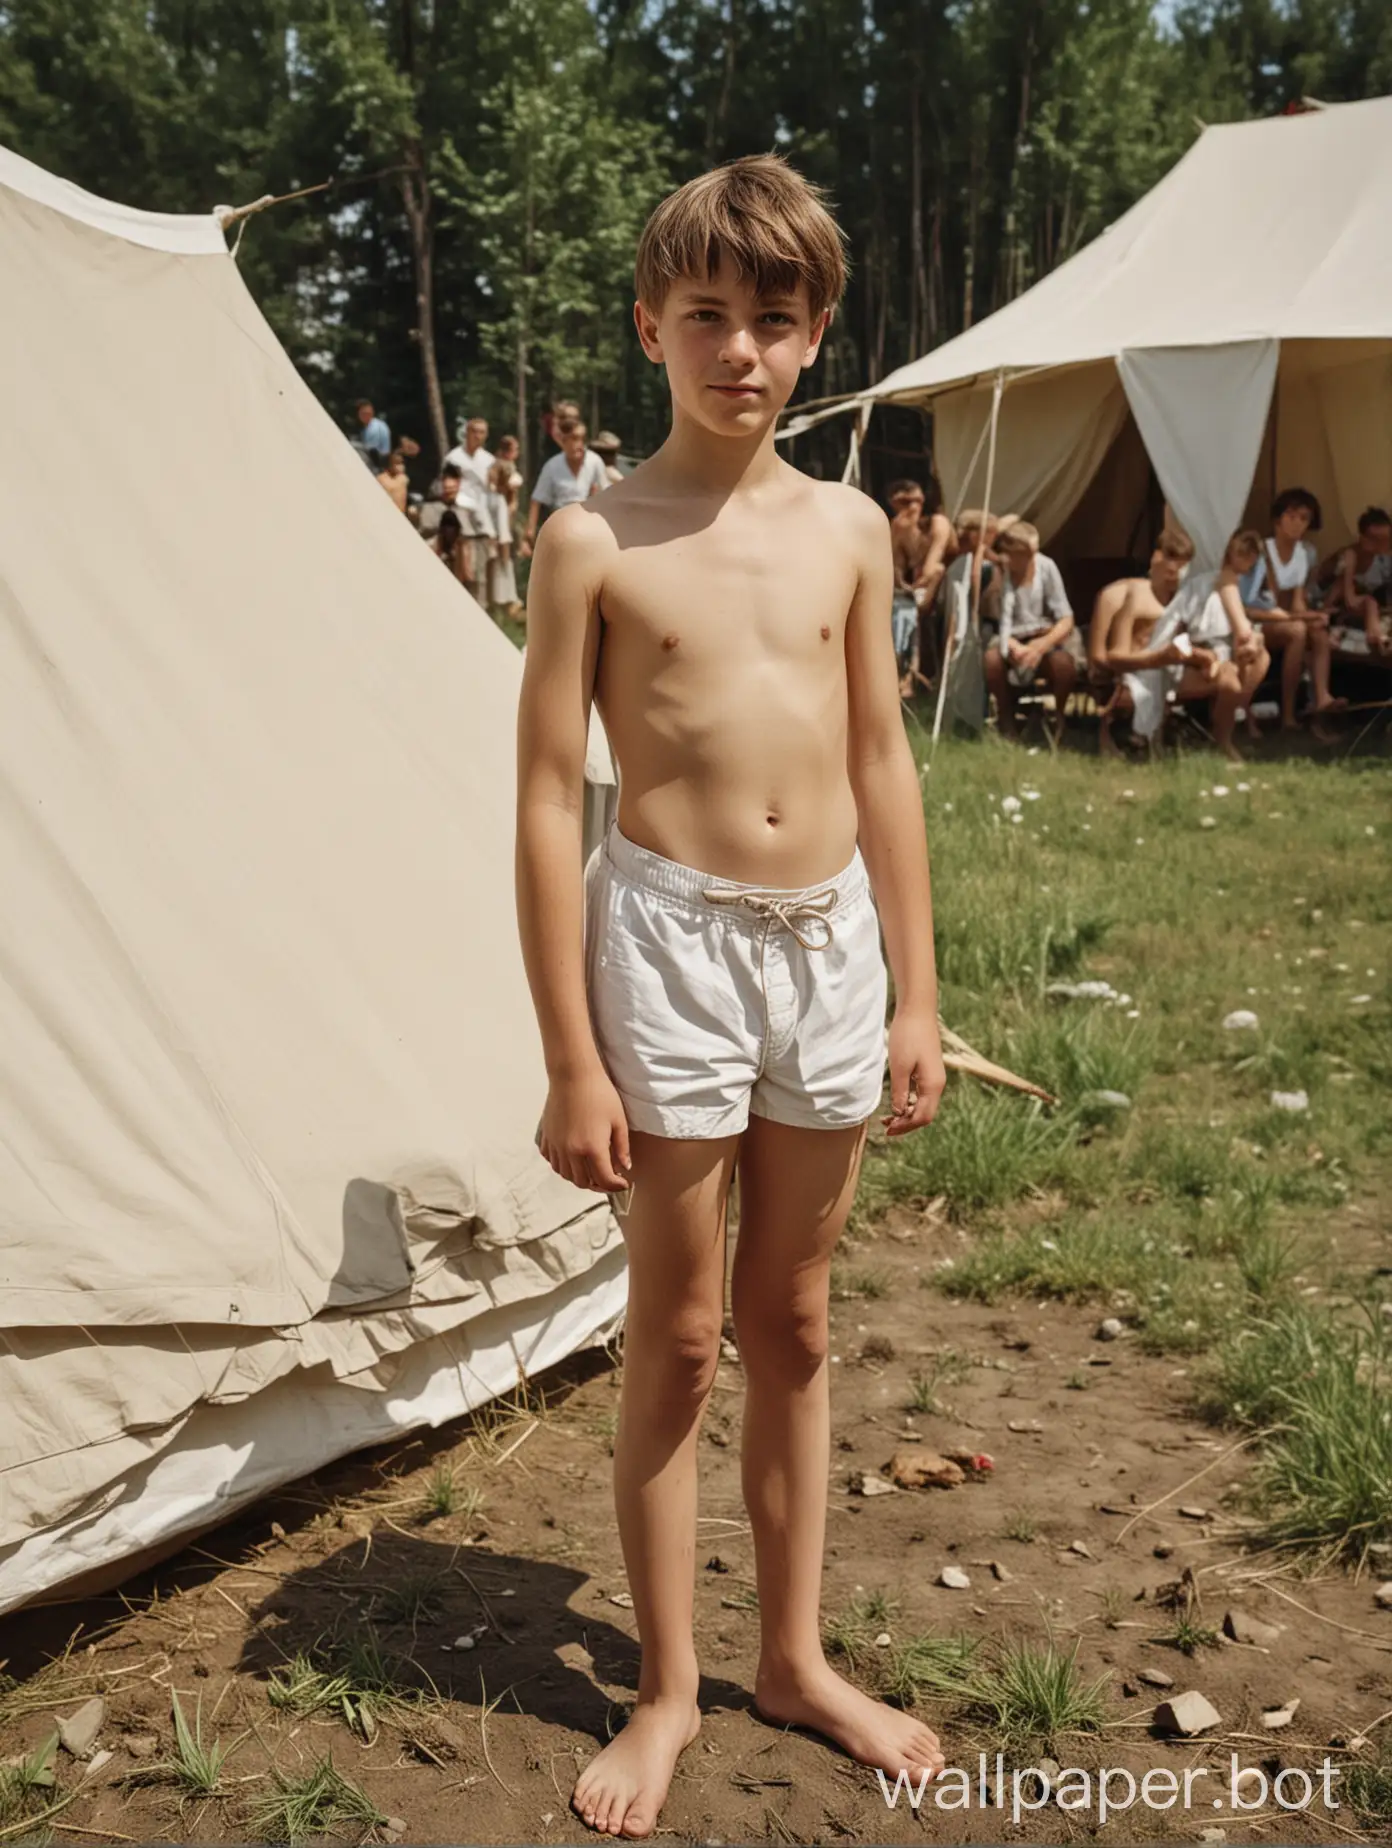 Soviet pioneer boy 13 years old, tent, full length, people in the background, white swim trunks